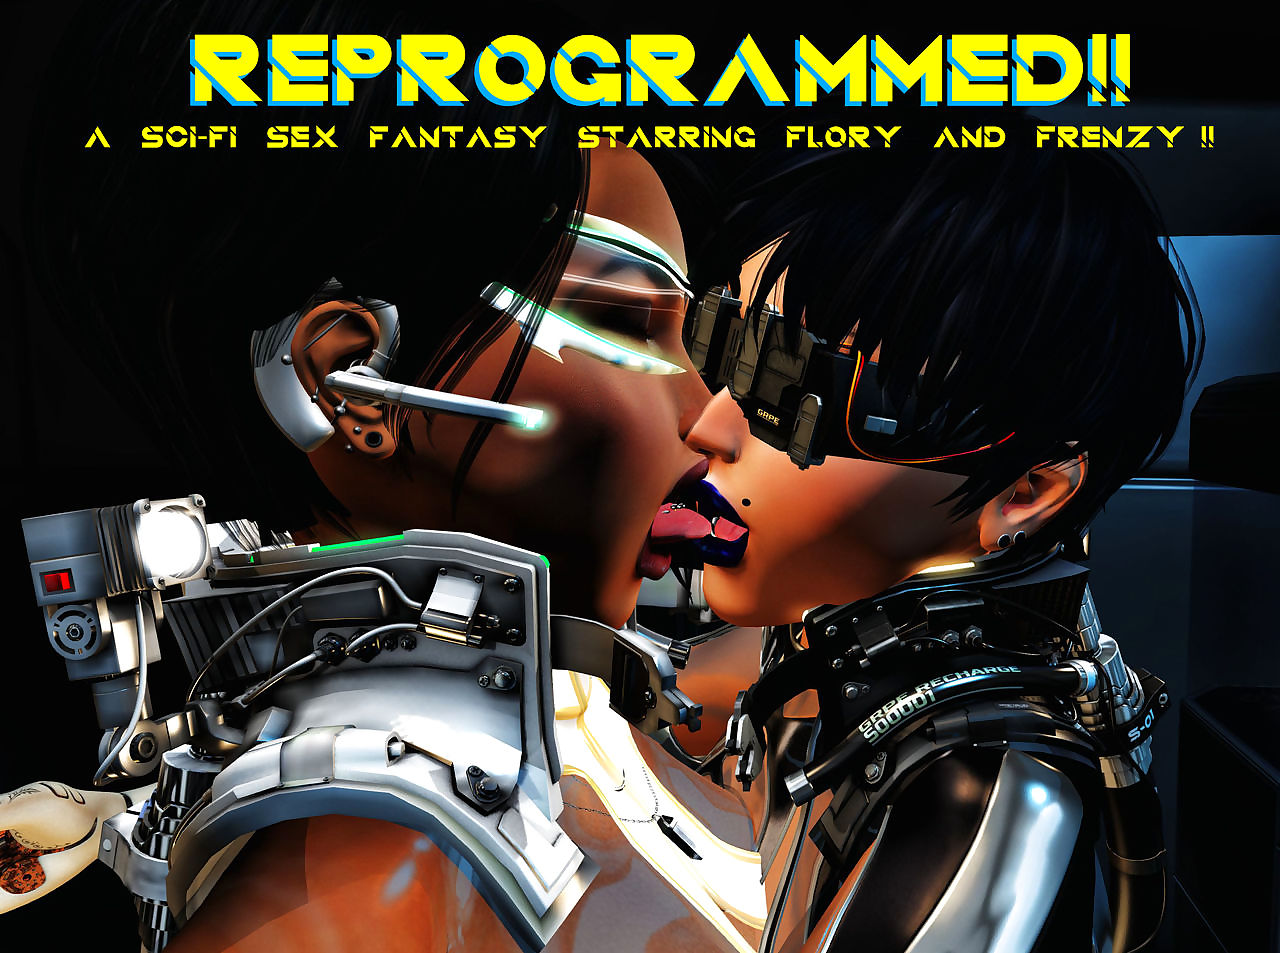 frenzy in sl reprogrammed! page 1